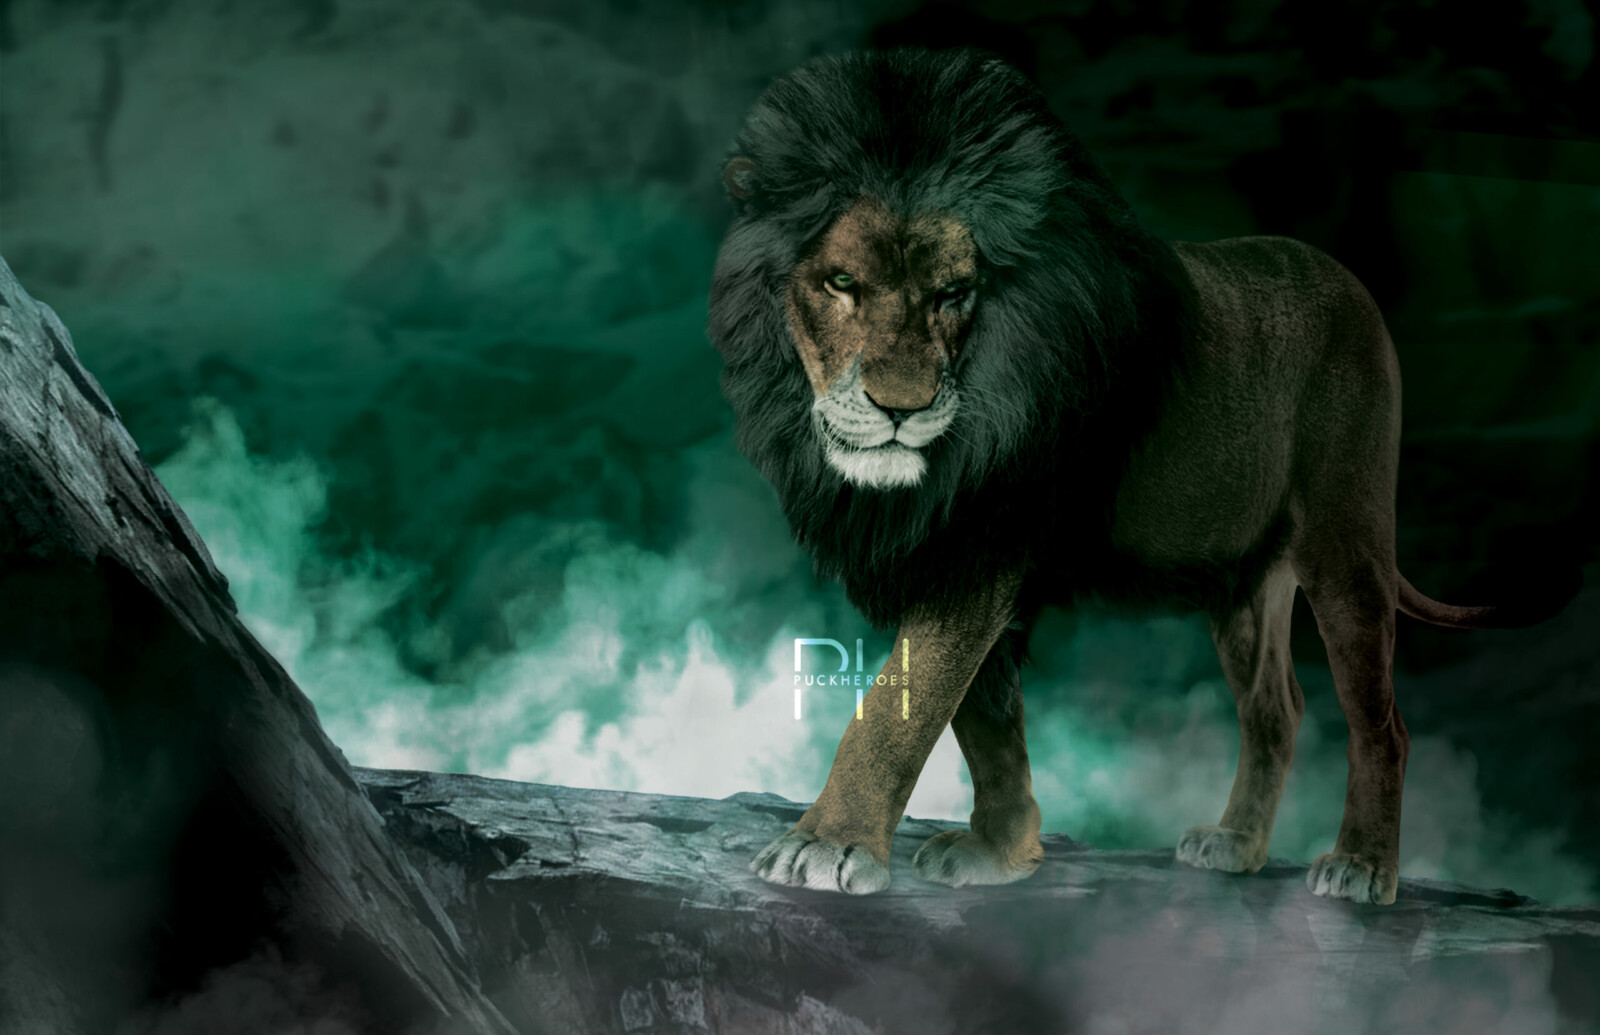 The Lion King Scar Photo Manipulation Posterspy